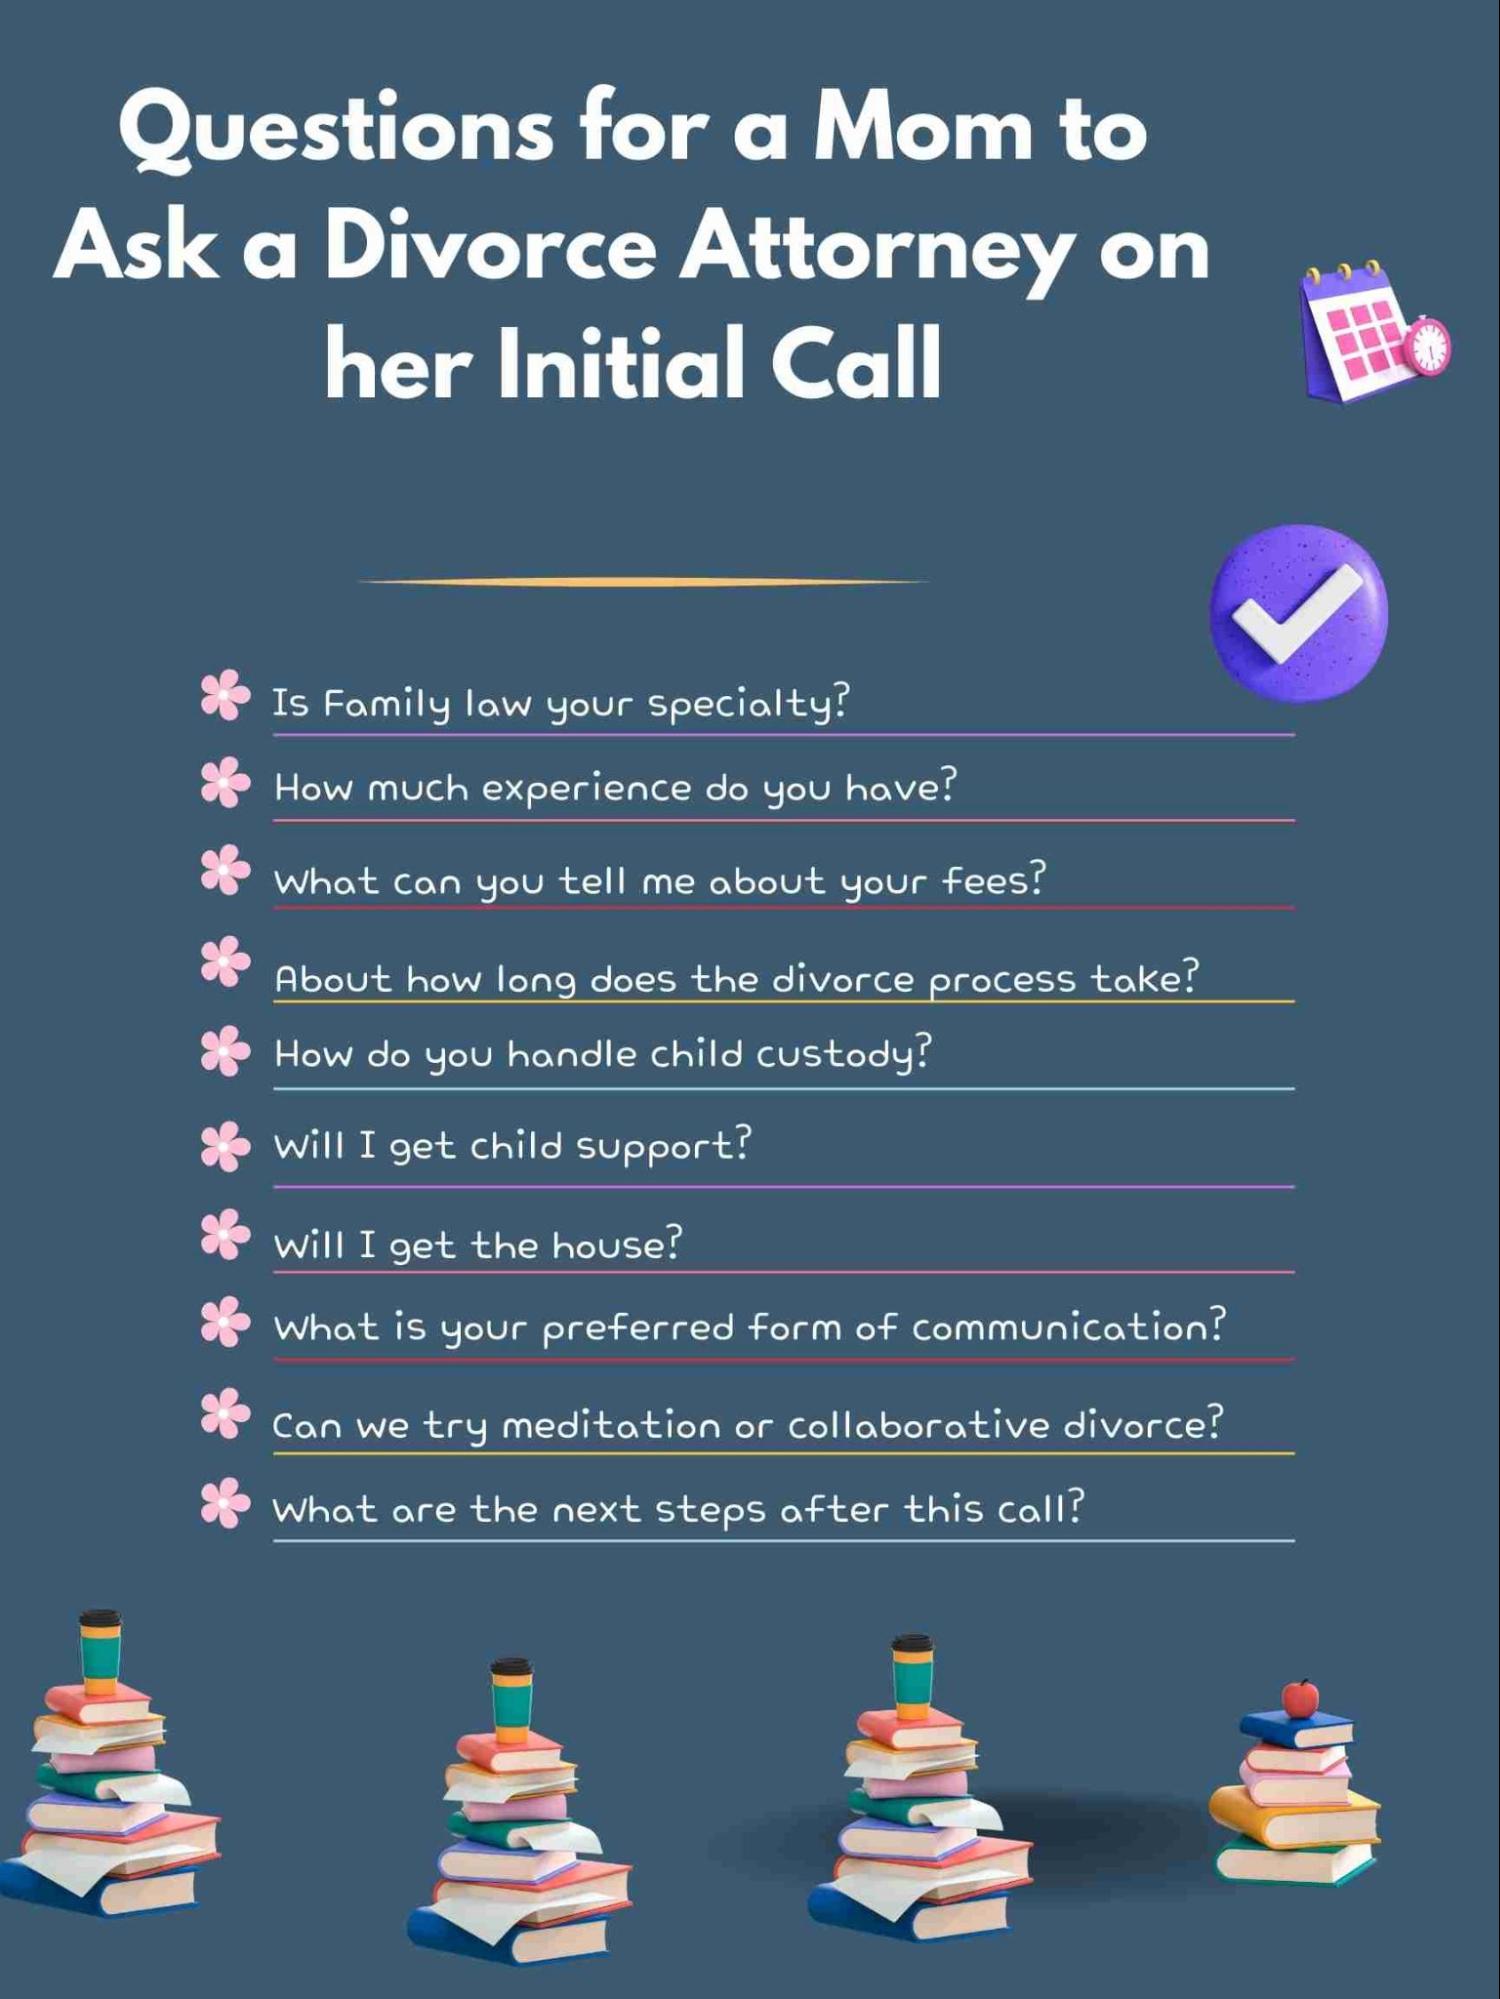 Questions for a mom to ask a divorce attorney on her initial call.